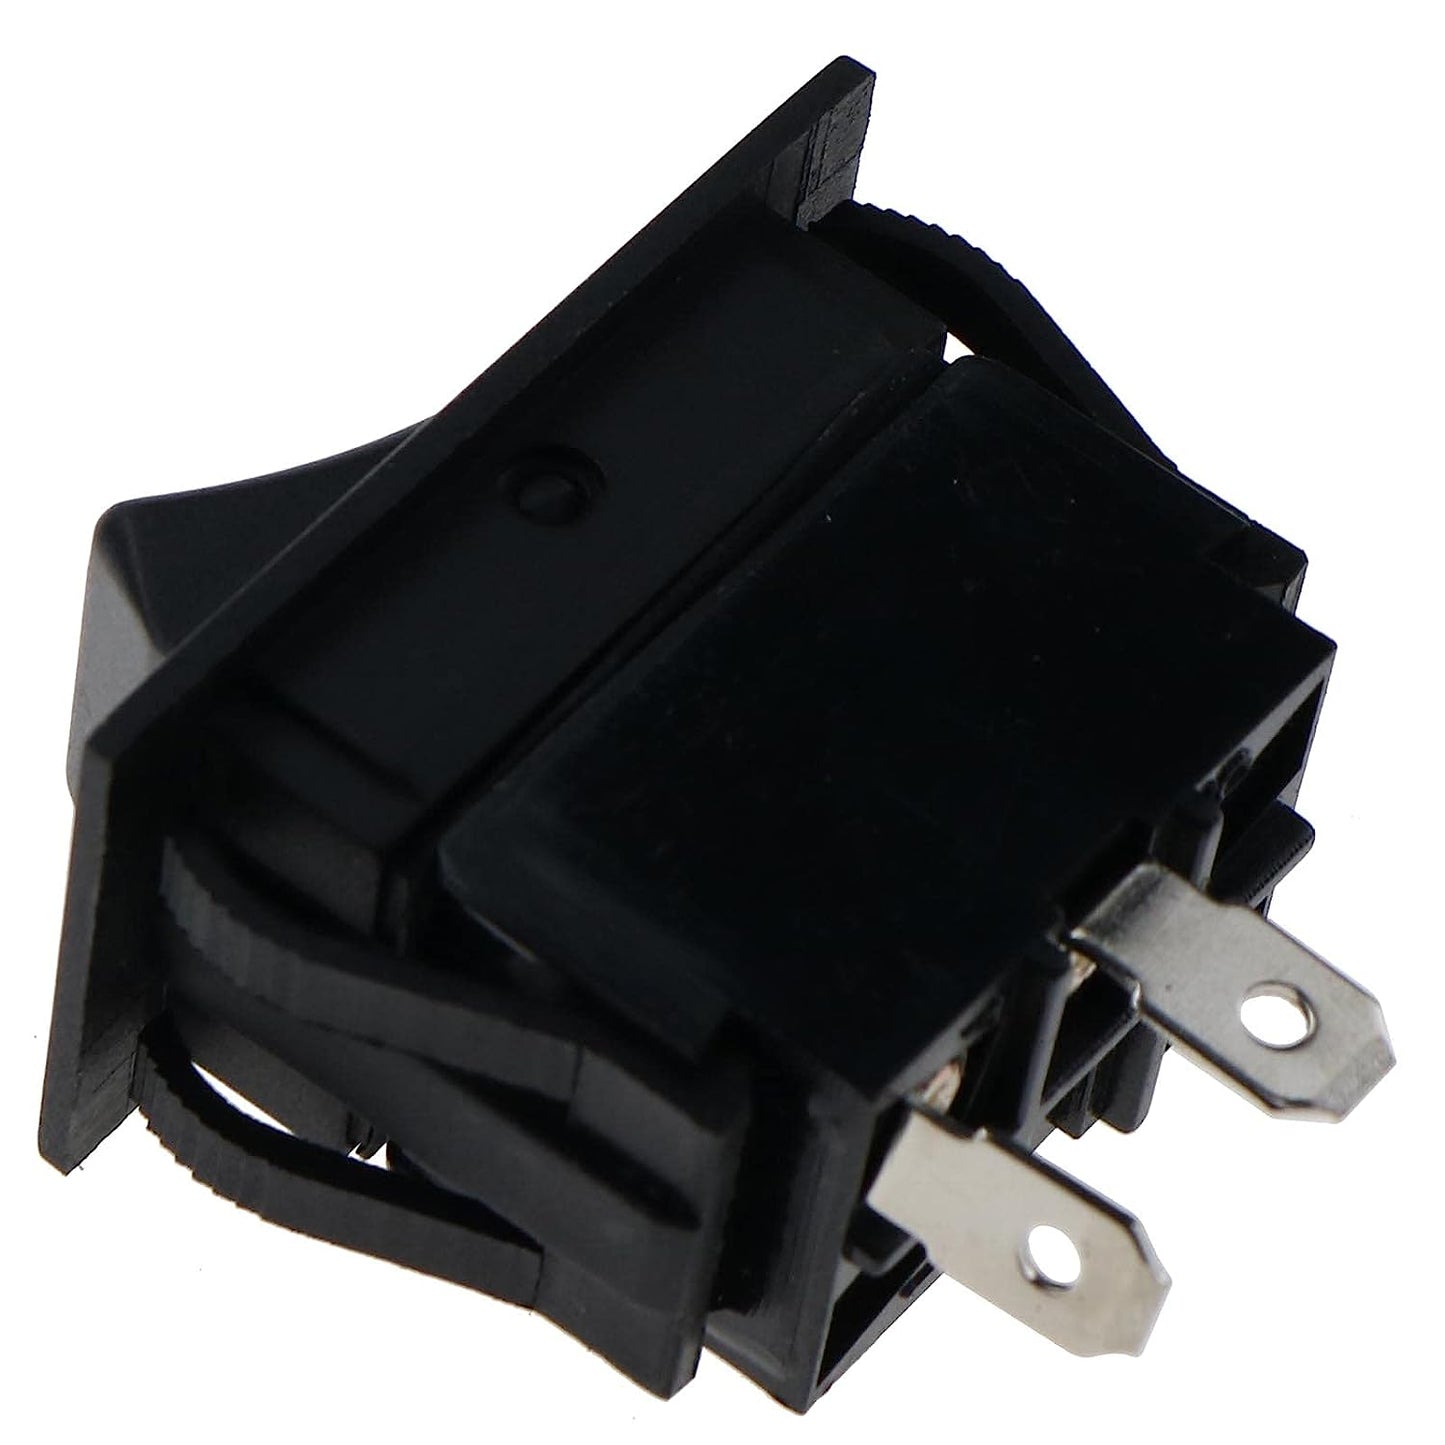 AM117324 Toggle Rocker Headlight Switch Compatible with John Deere 717A 727A 737 757 777 797